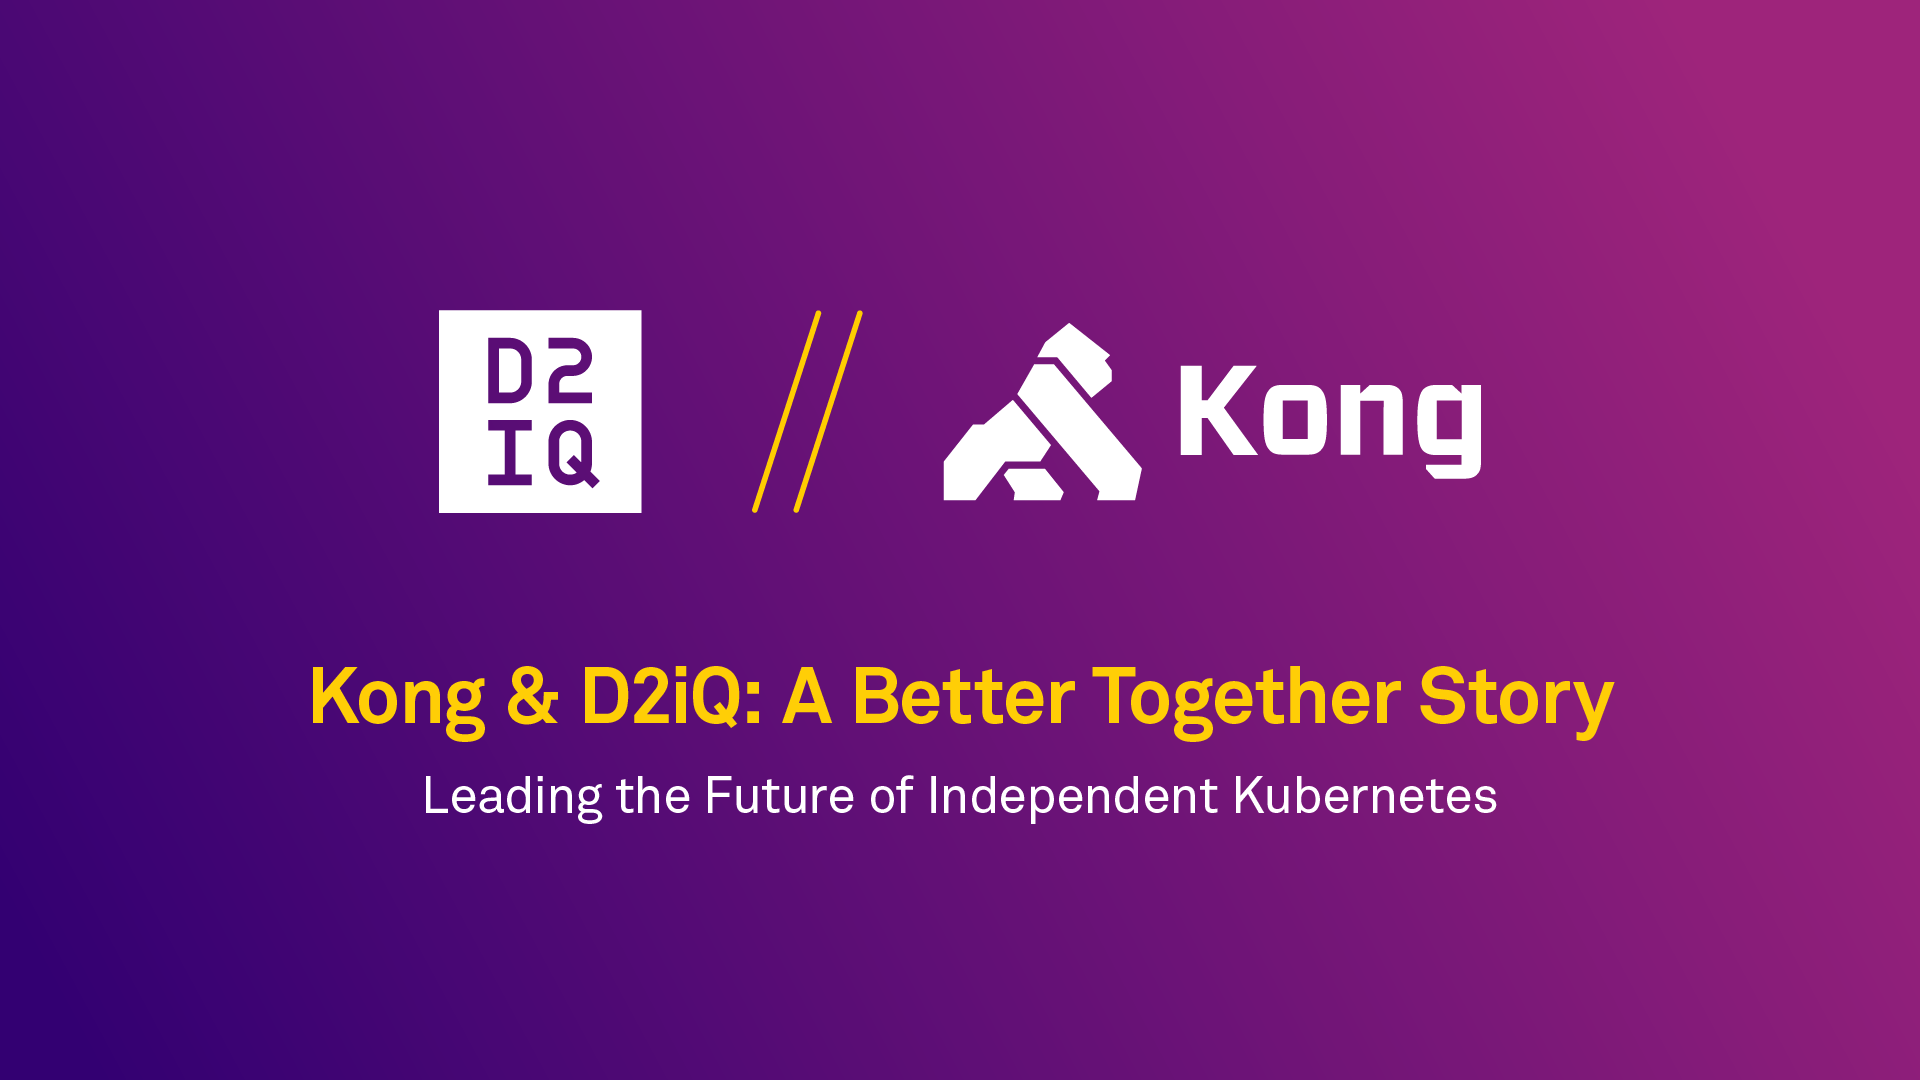 Kong and D2iQ: A Better Together Story